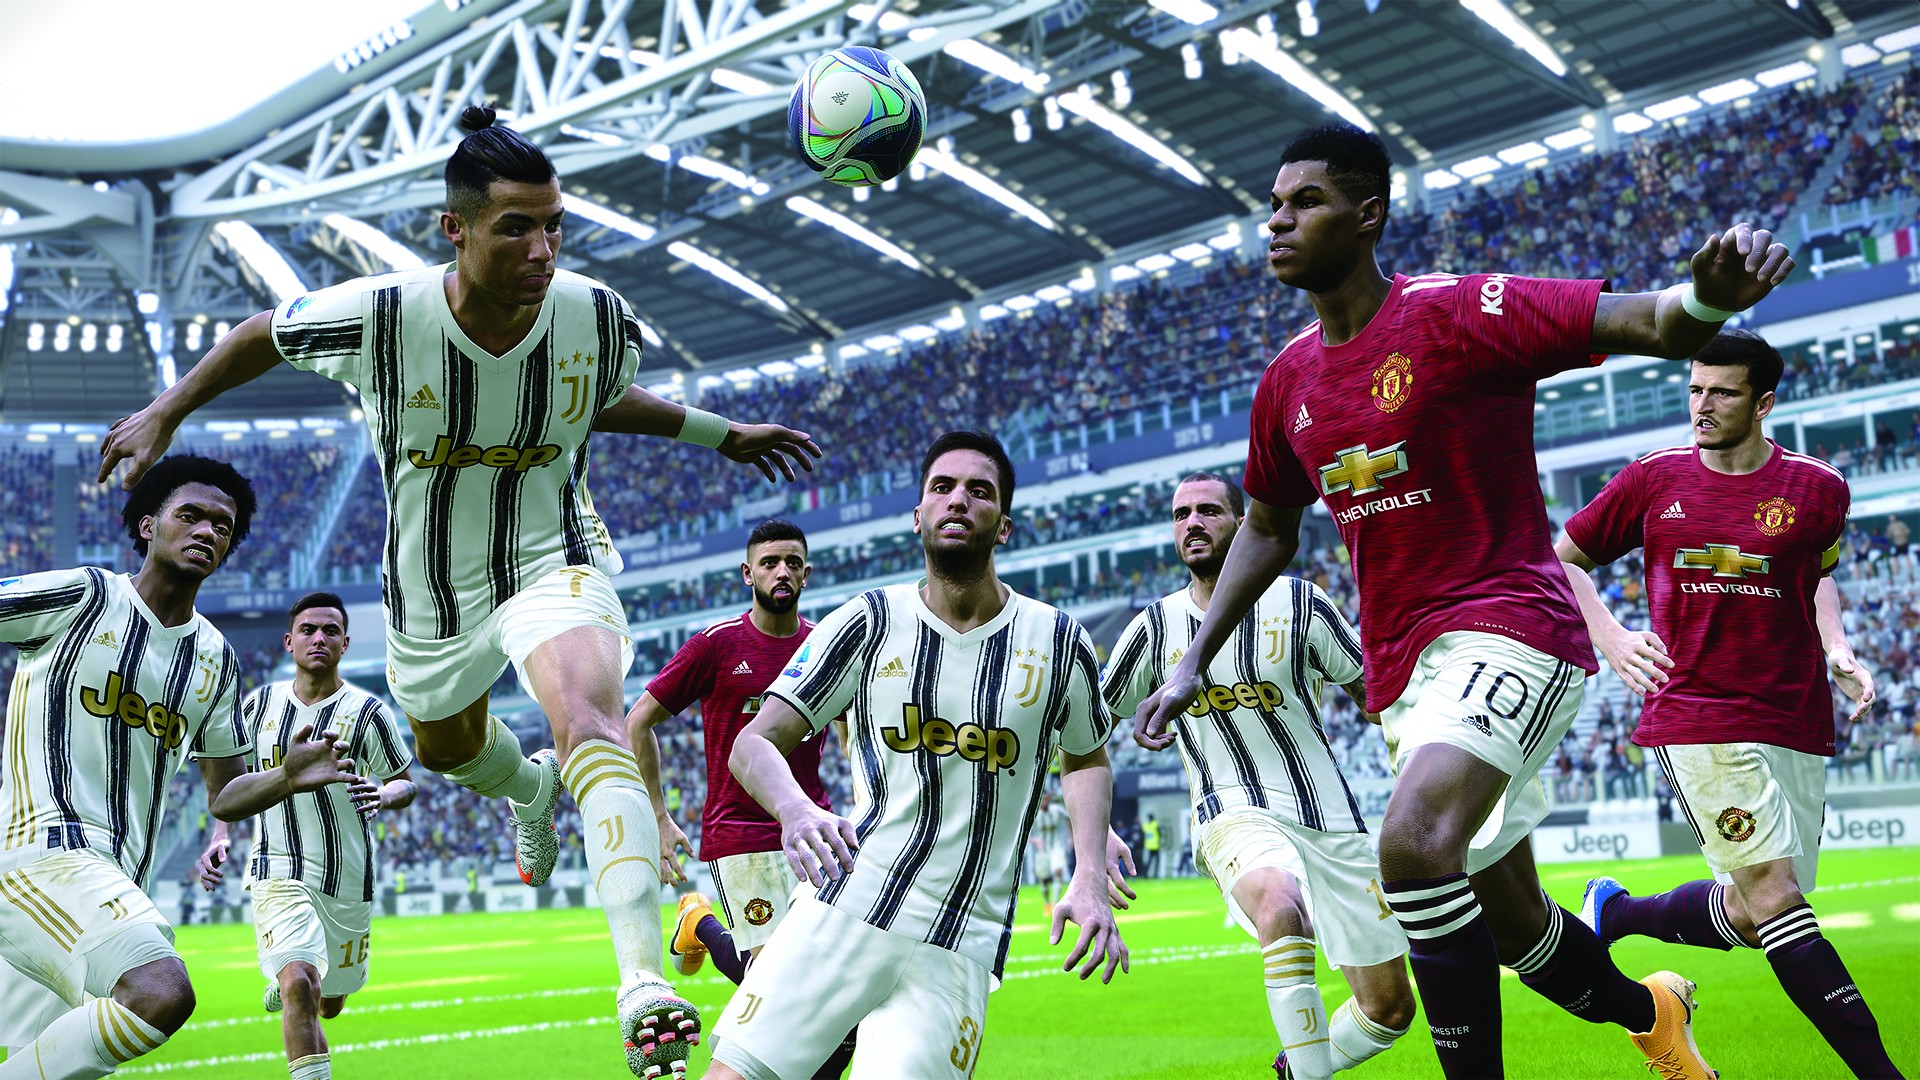 eFootball PES 2021 Season Update the Game Review